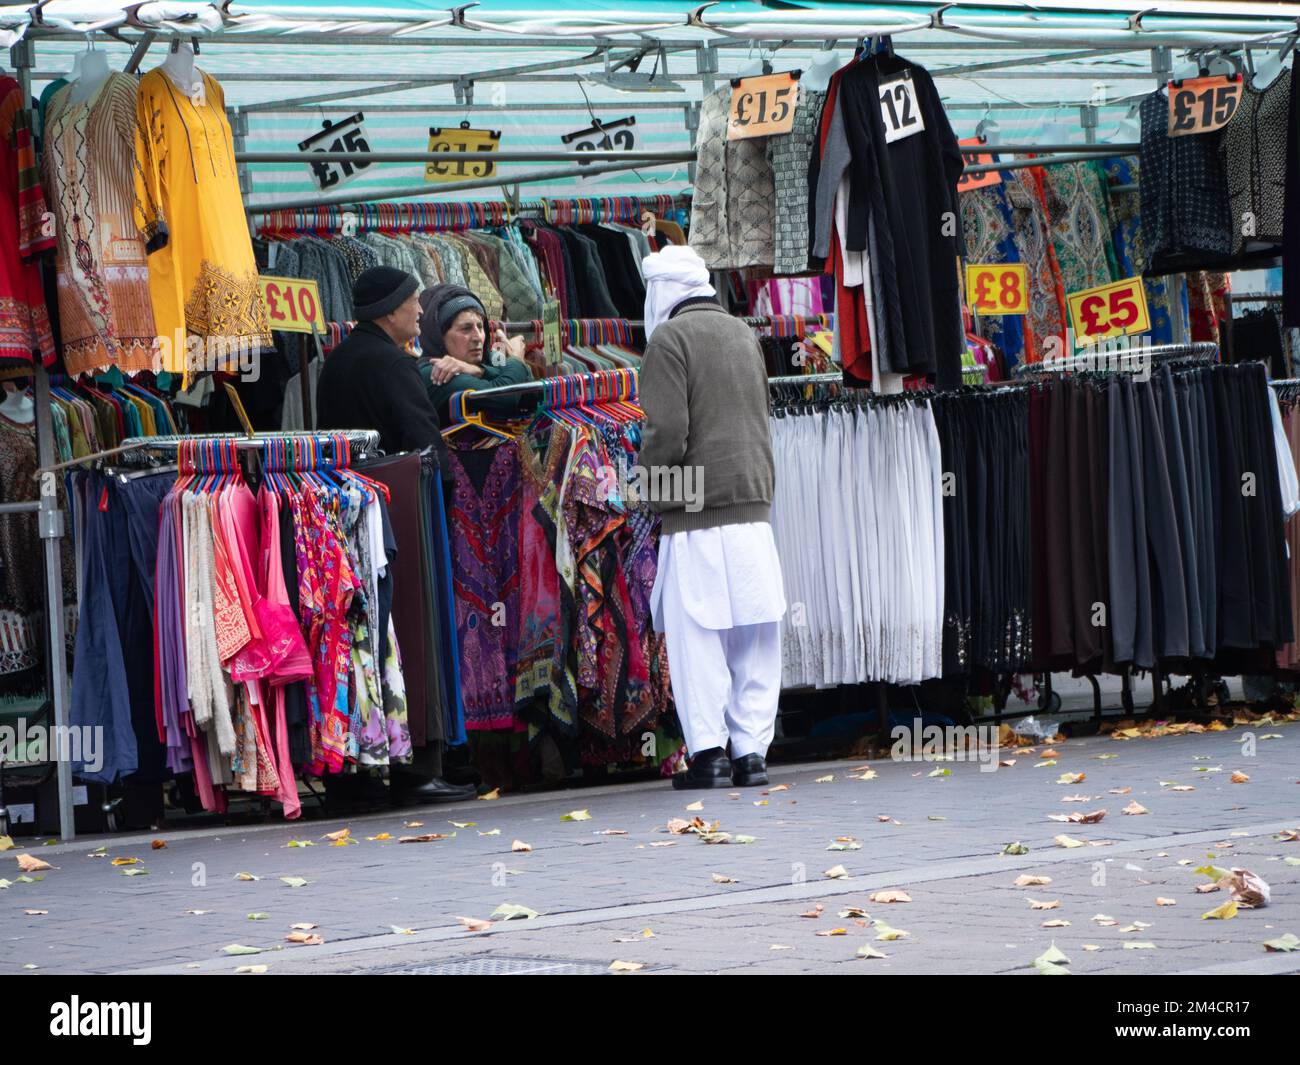 Walthamstow market, London, UK, the longest outdoor market in Europe, with traders and market stall holders serving shoppers, with prices displayed in pounds Stock Photo